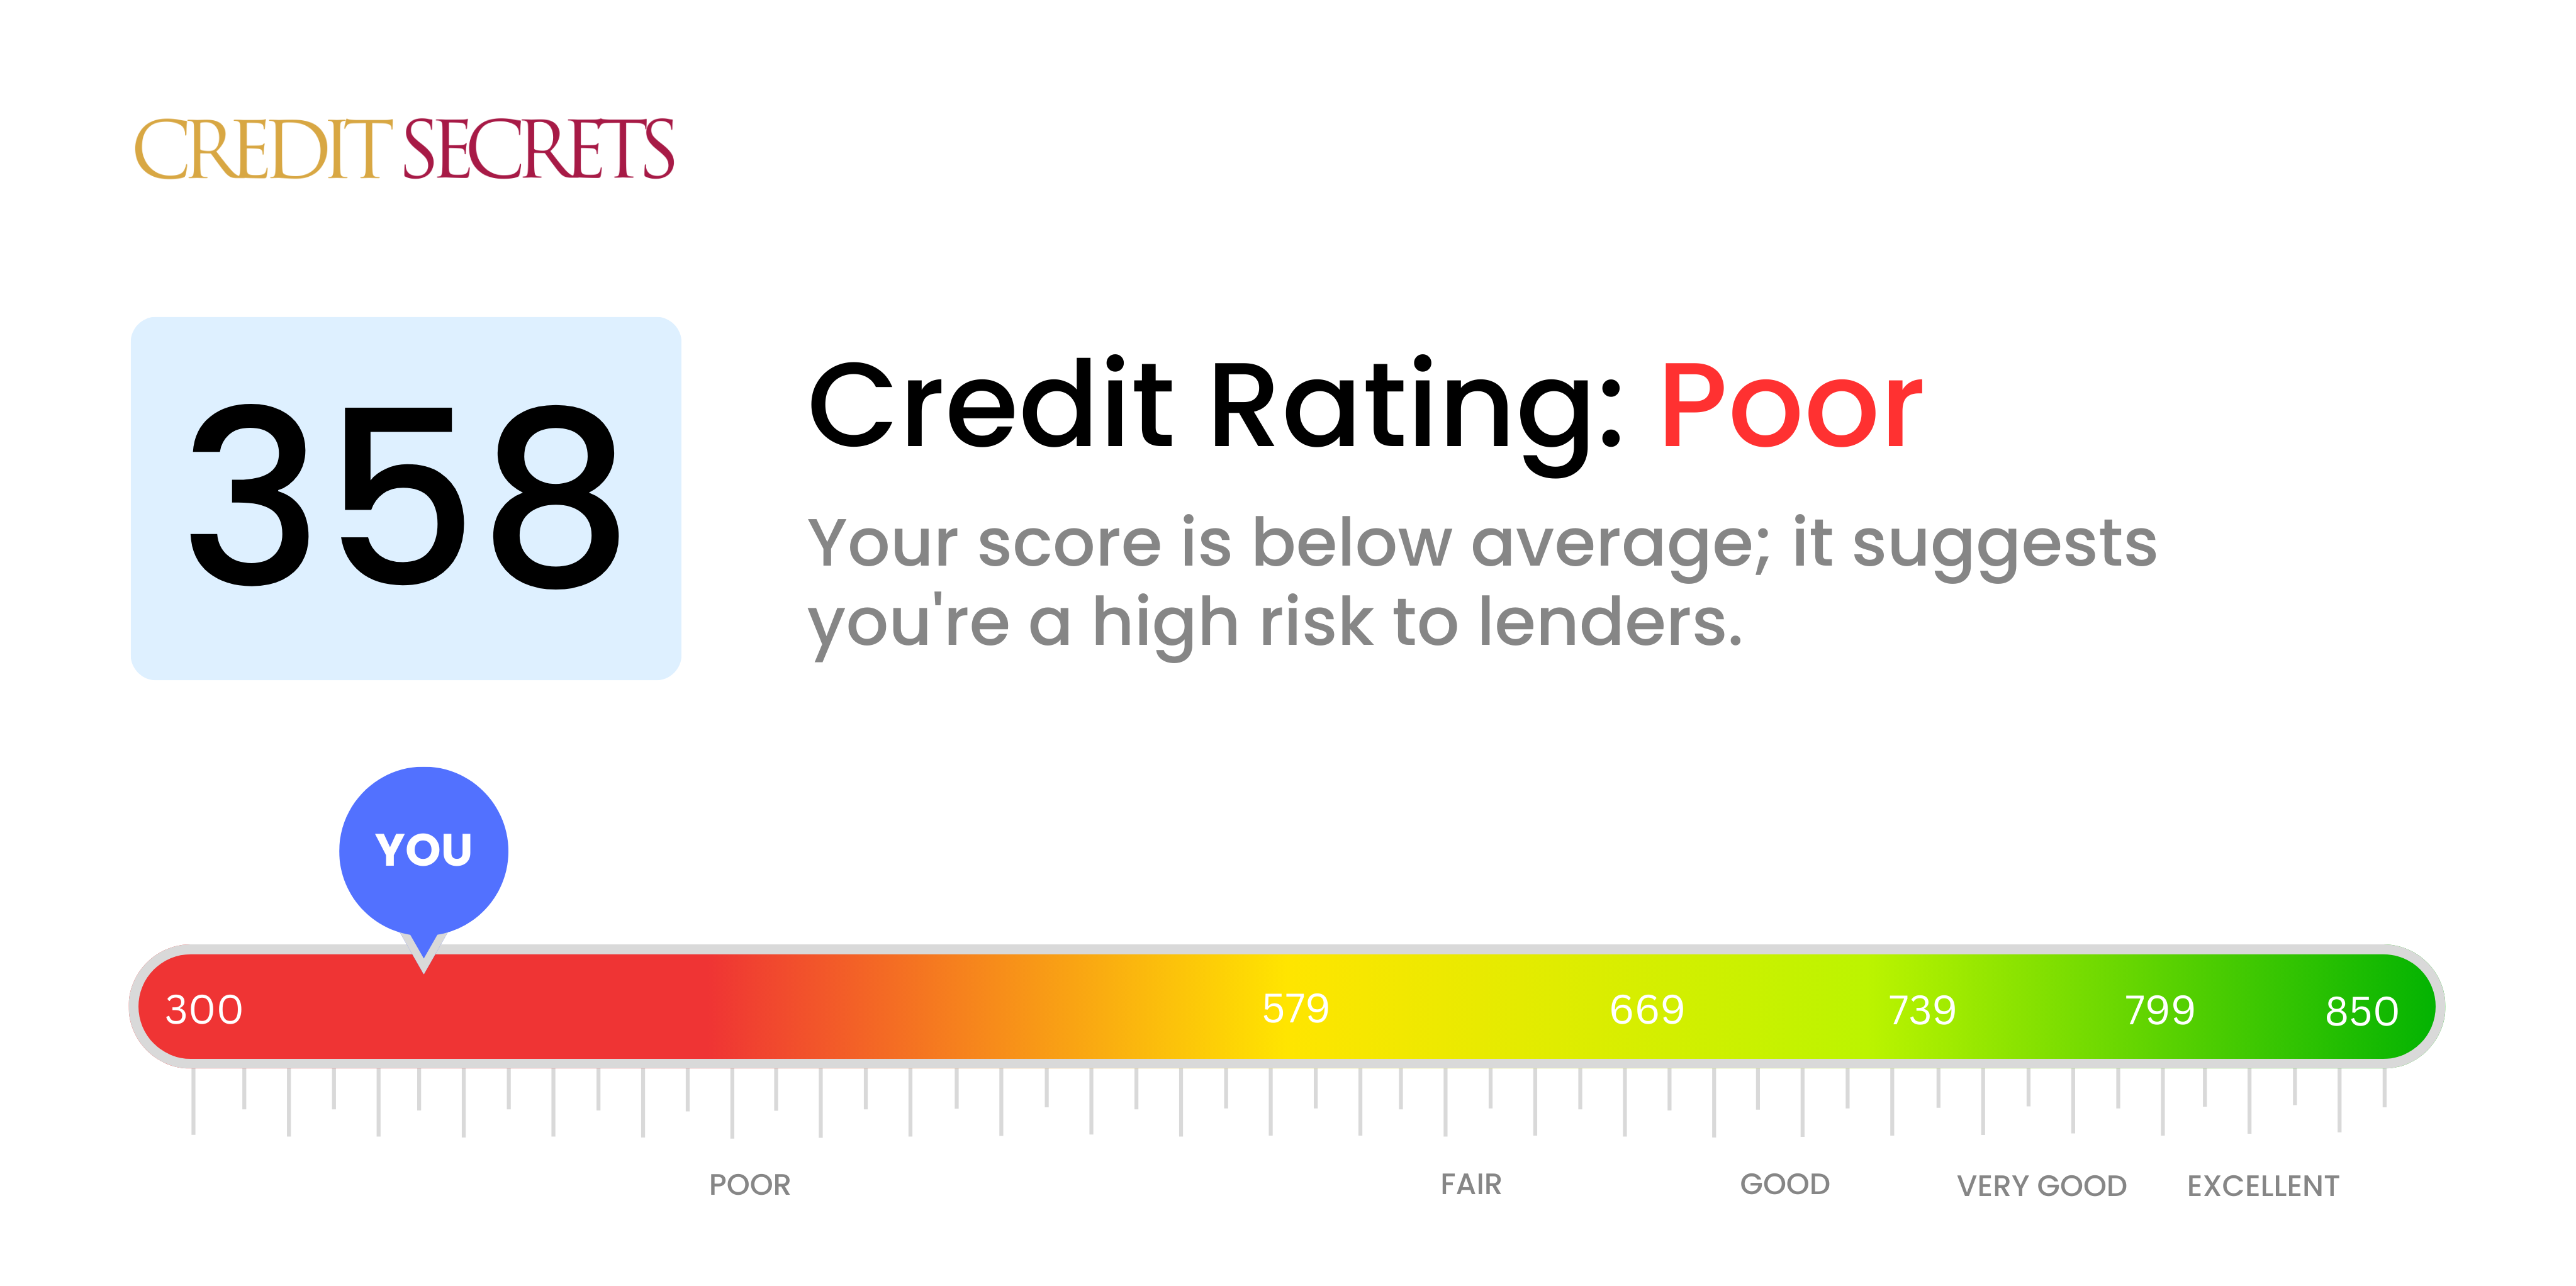 Is 358 a good credit score?